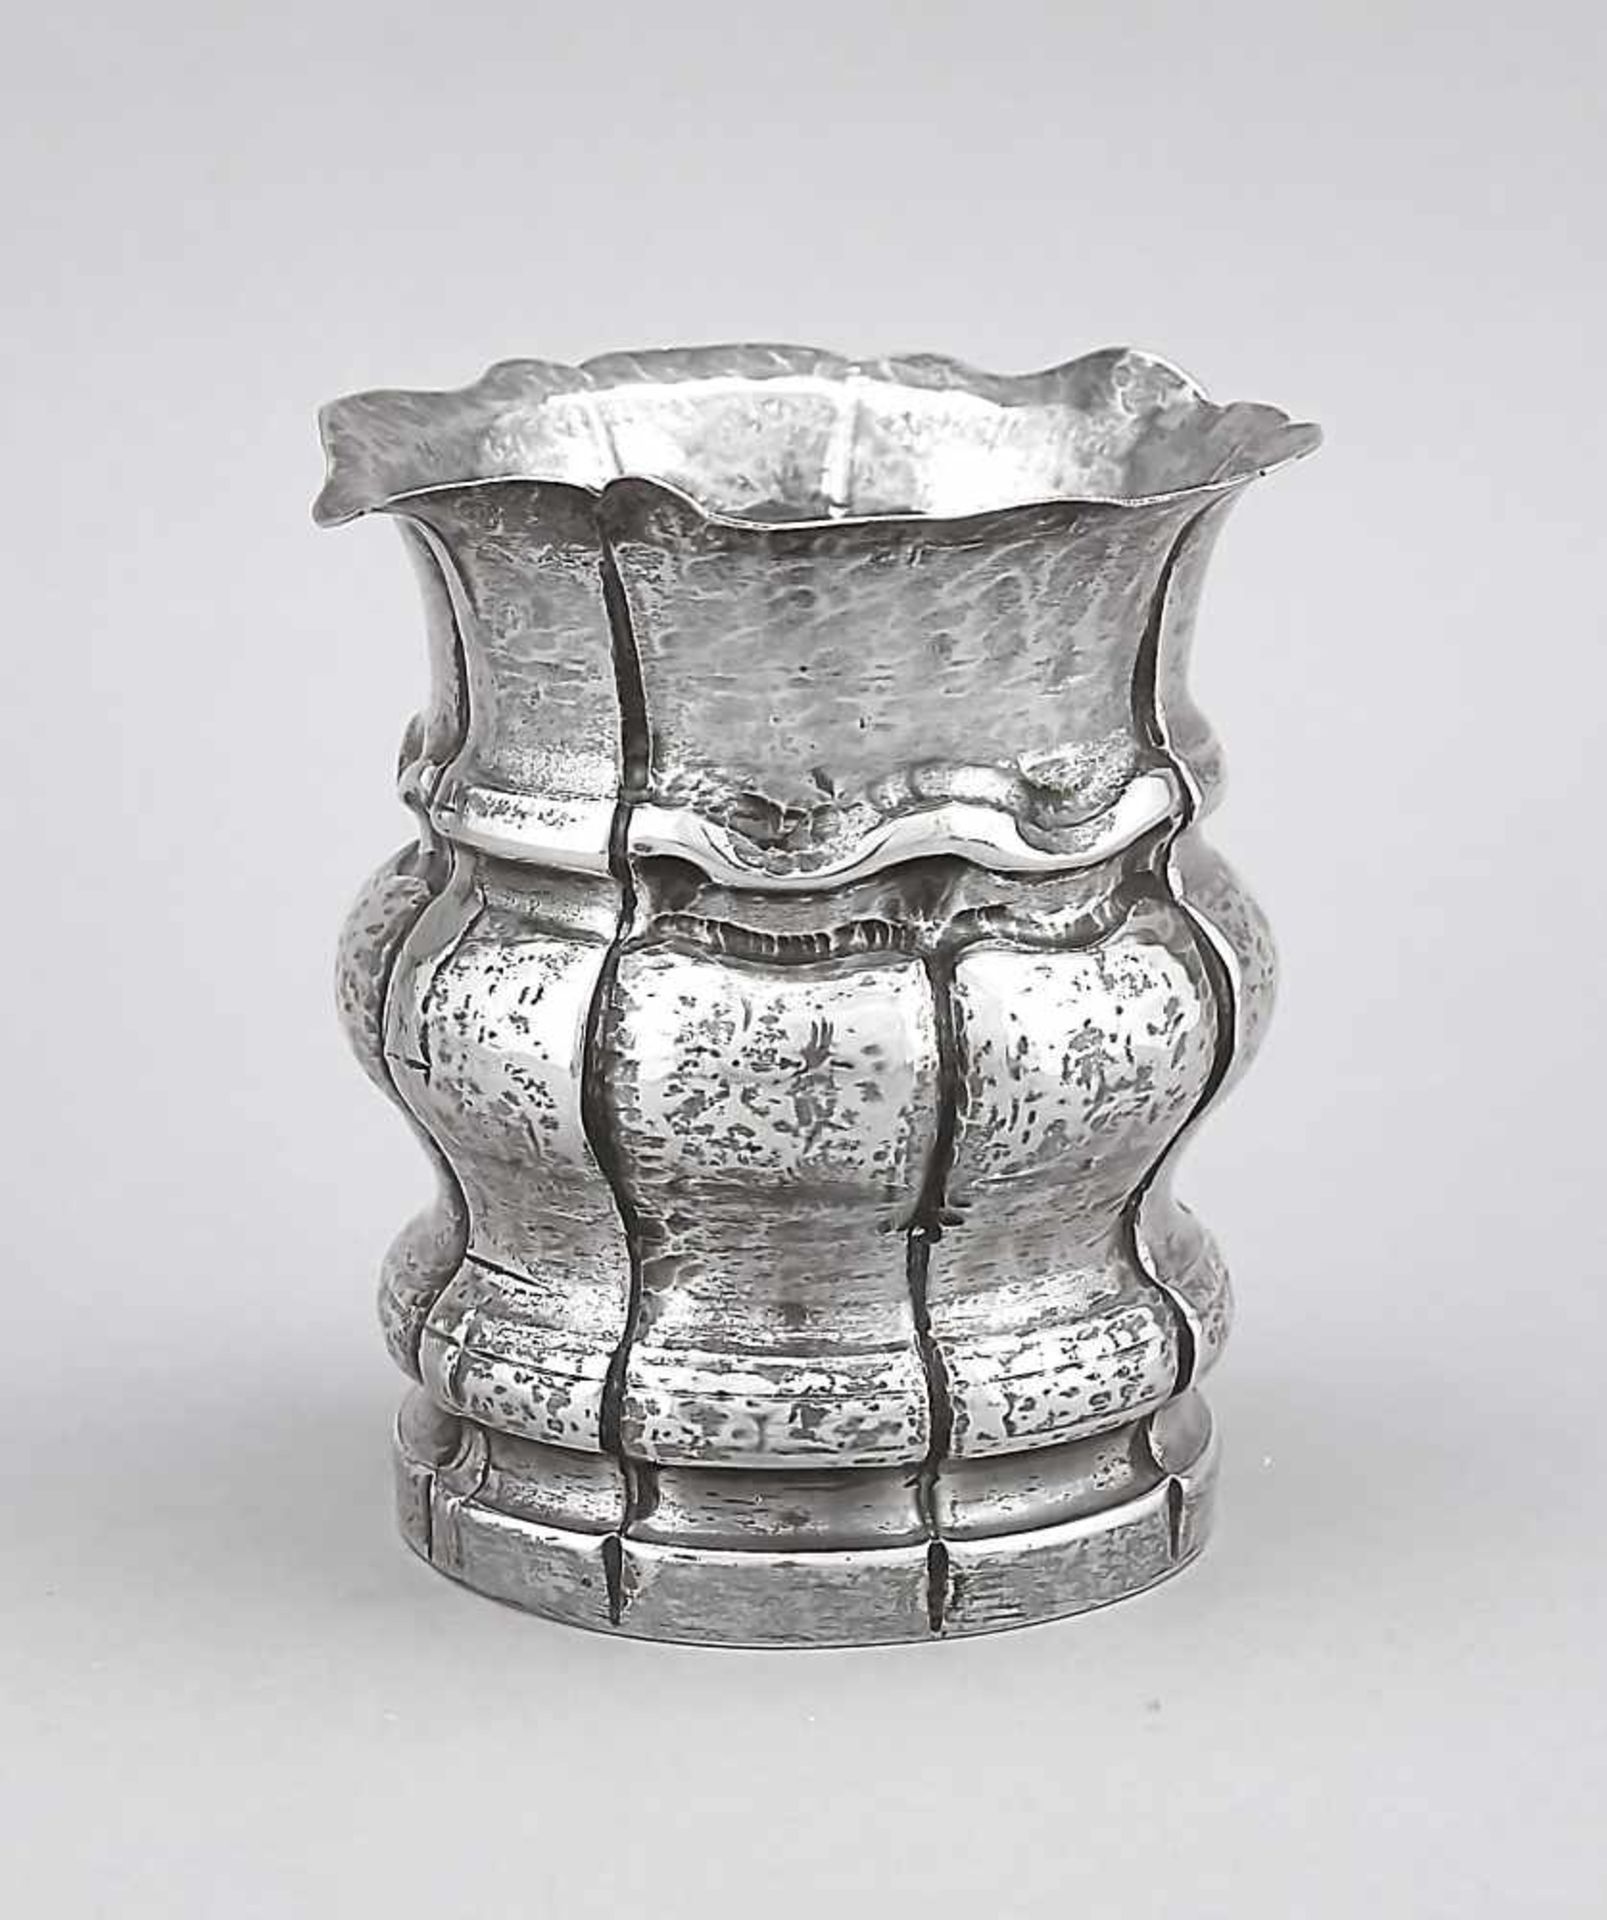 Vase, 20th cent. silver marked, round base, bulgy body, bent lip rim, wall with vertical